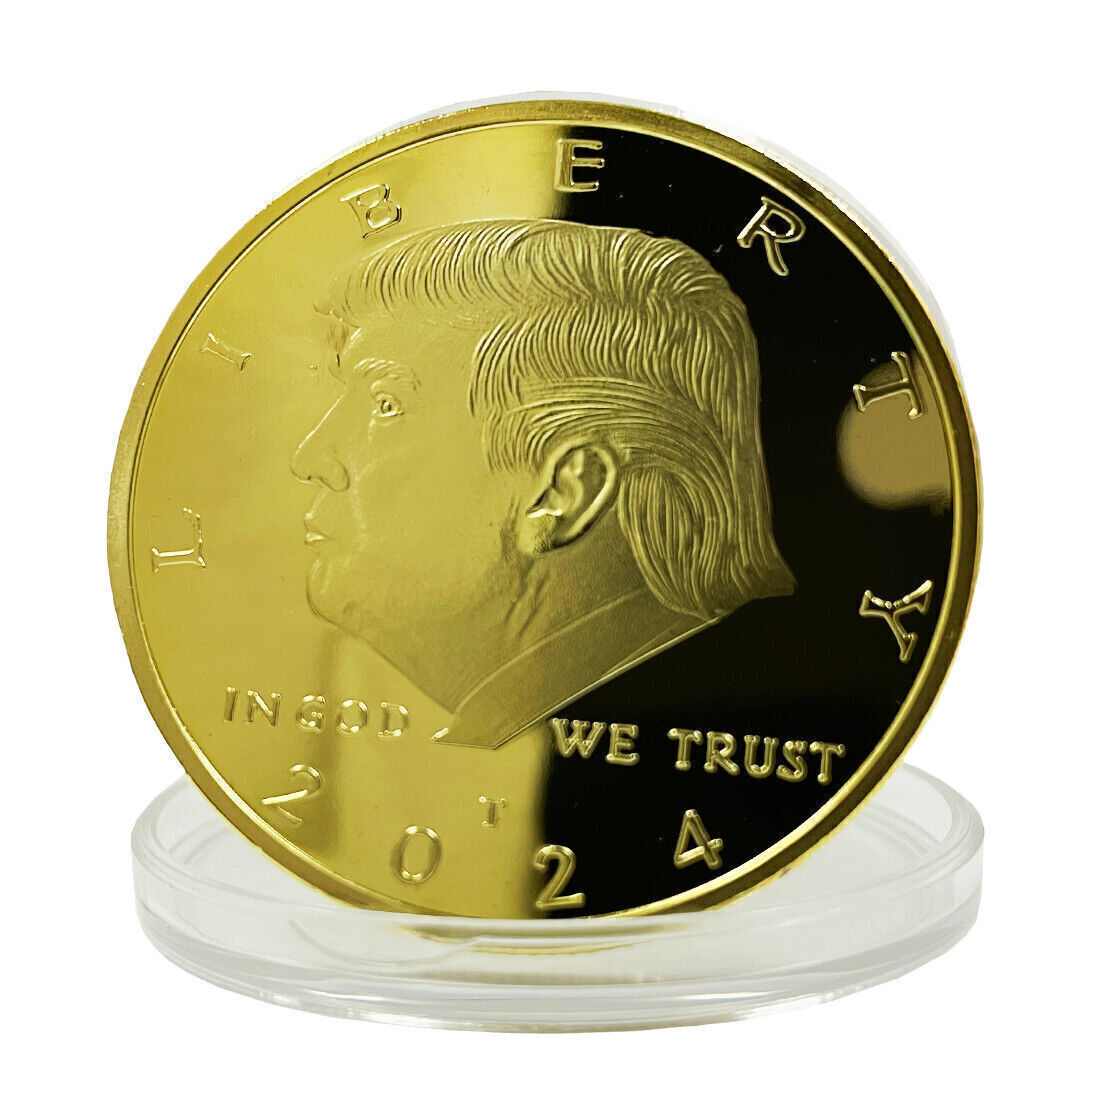 10x2024 Donald Trump President Gold Coin IN GOD WE TRUST Coins